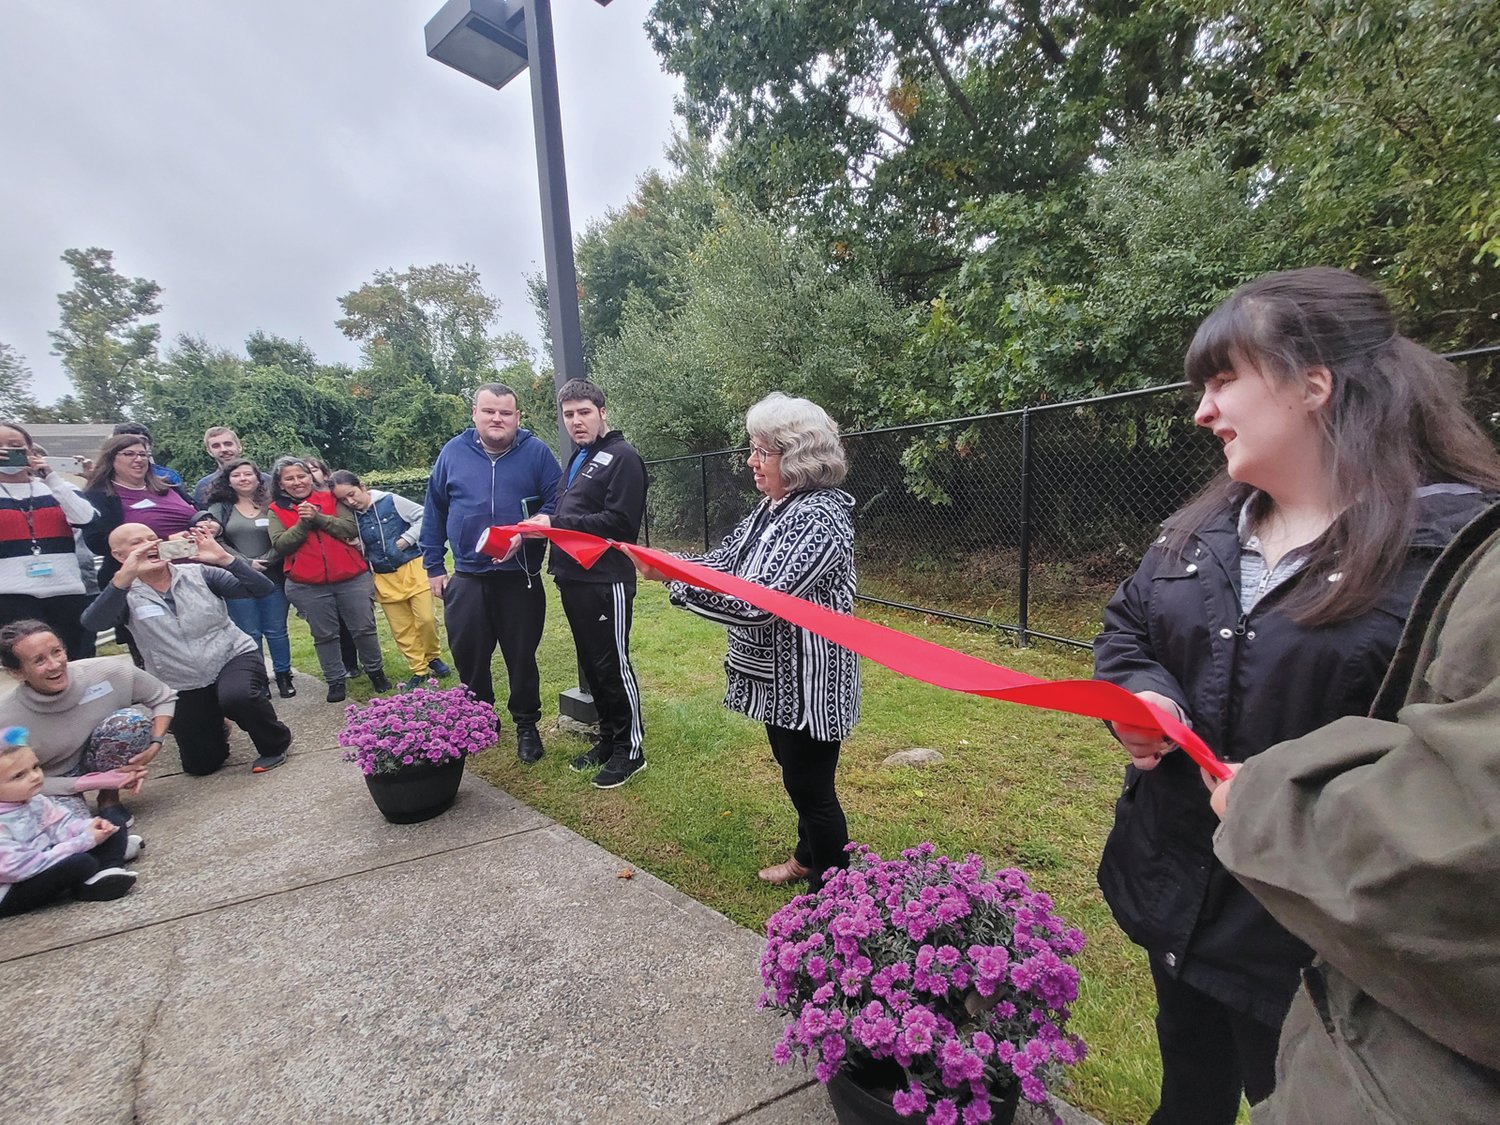 RIBBON SPLIT: Longtime Unity Community member’s mother, Maria DeSimone, snipped the red ribbon in half, and the TAP community garden was officially open.